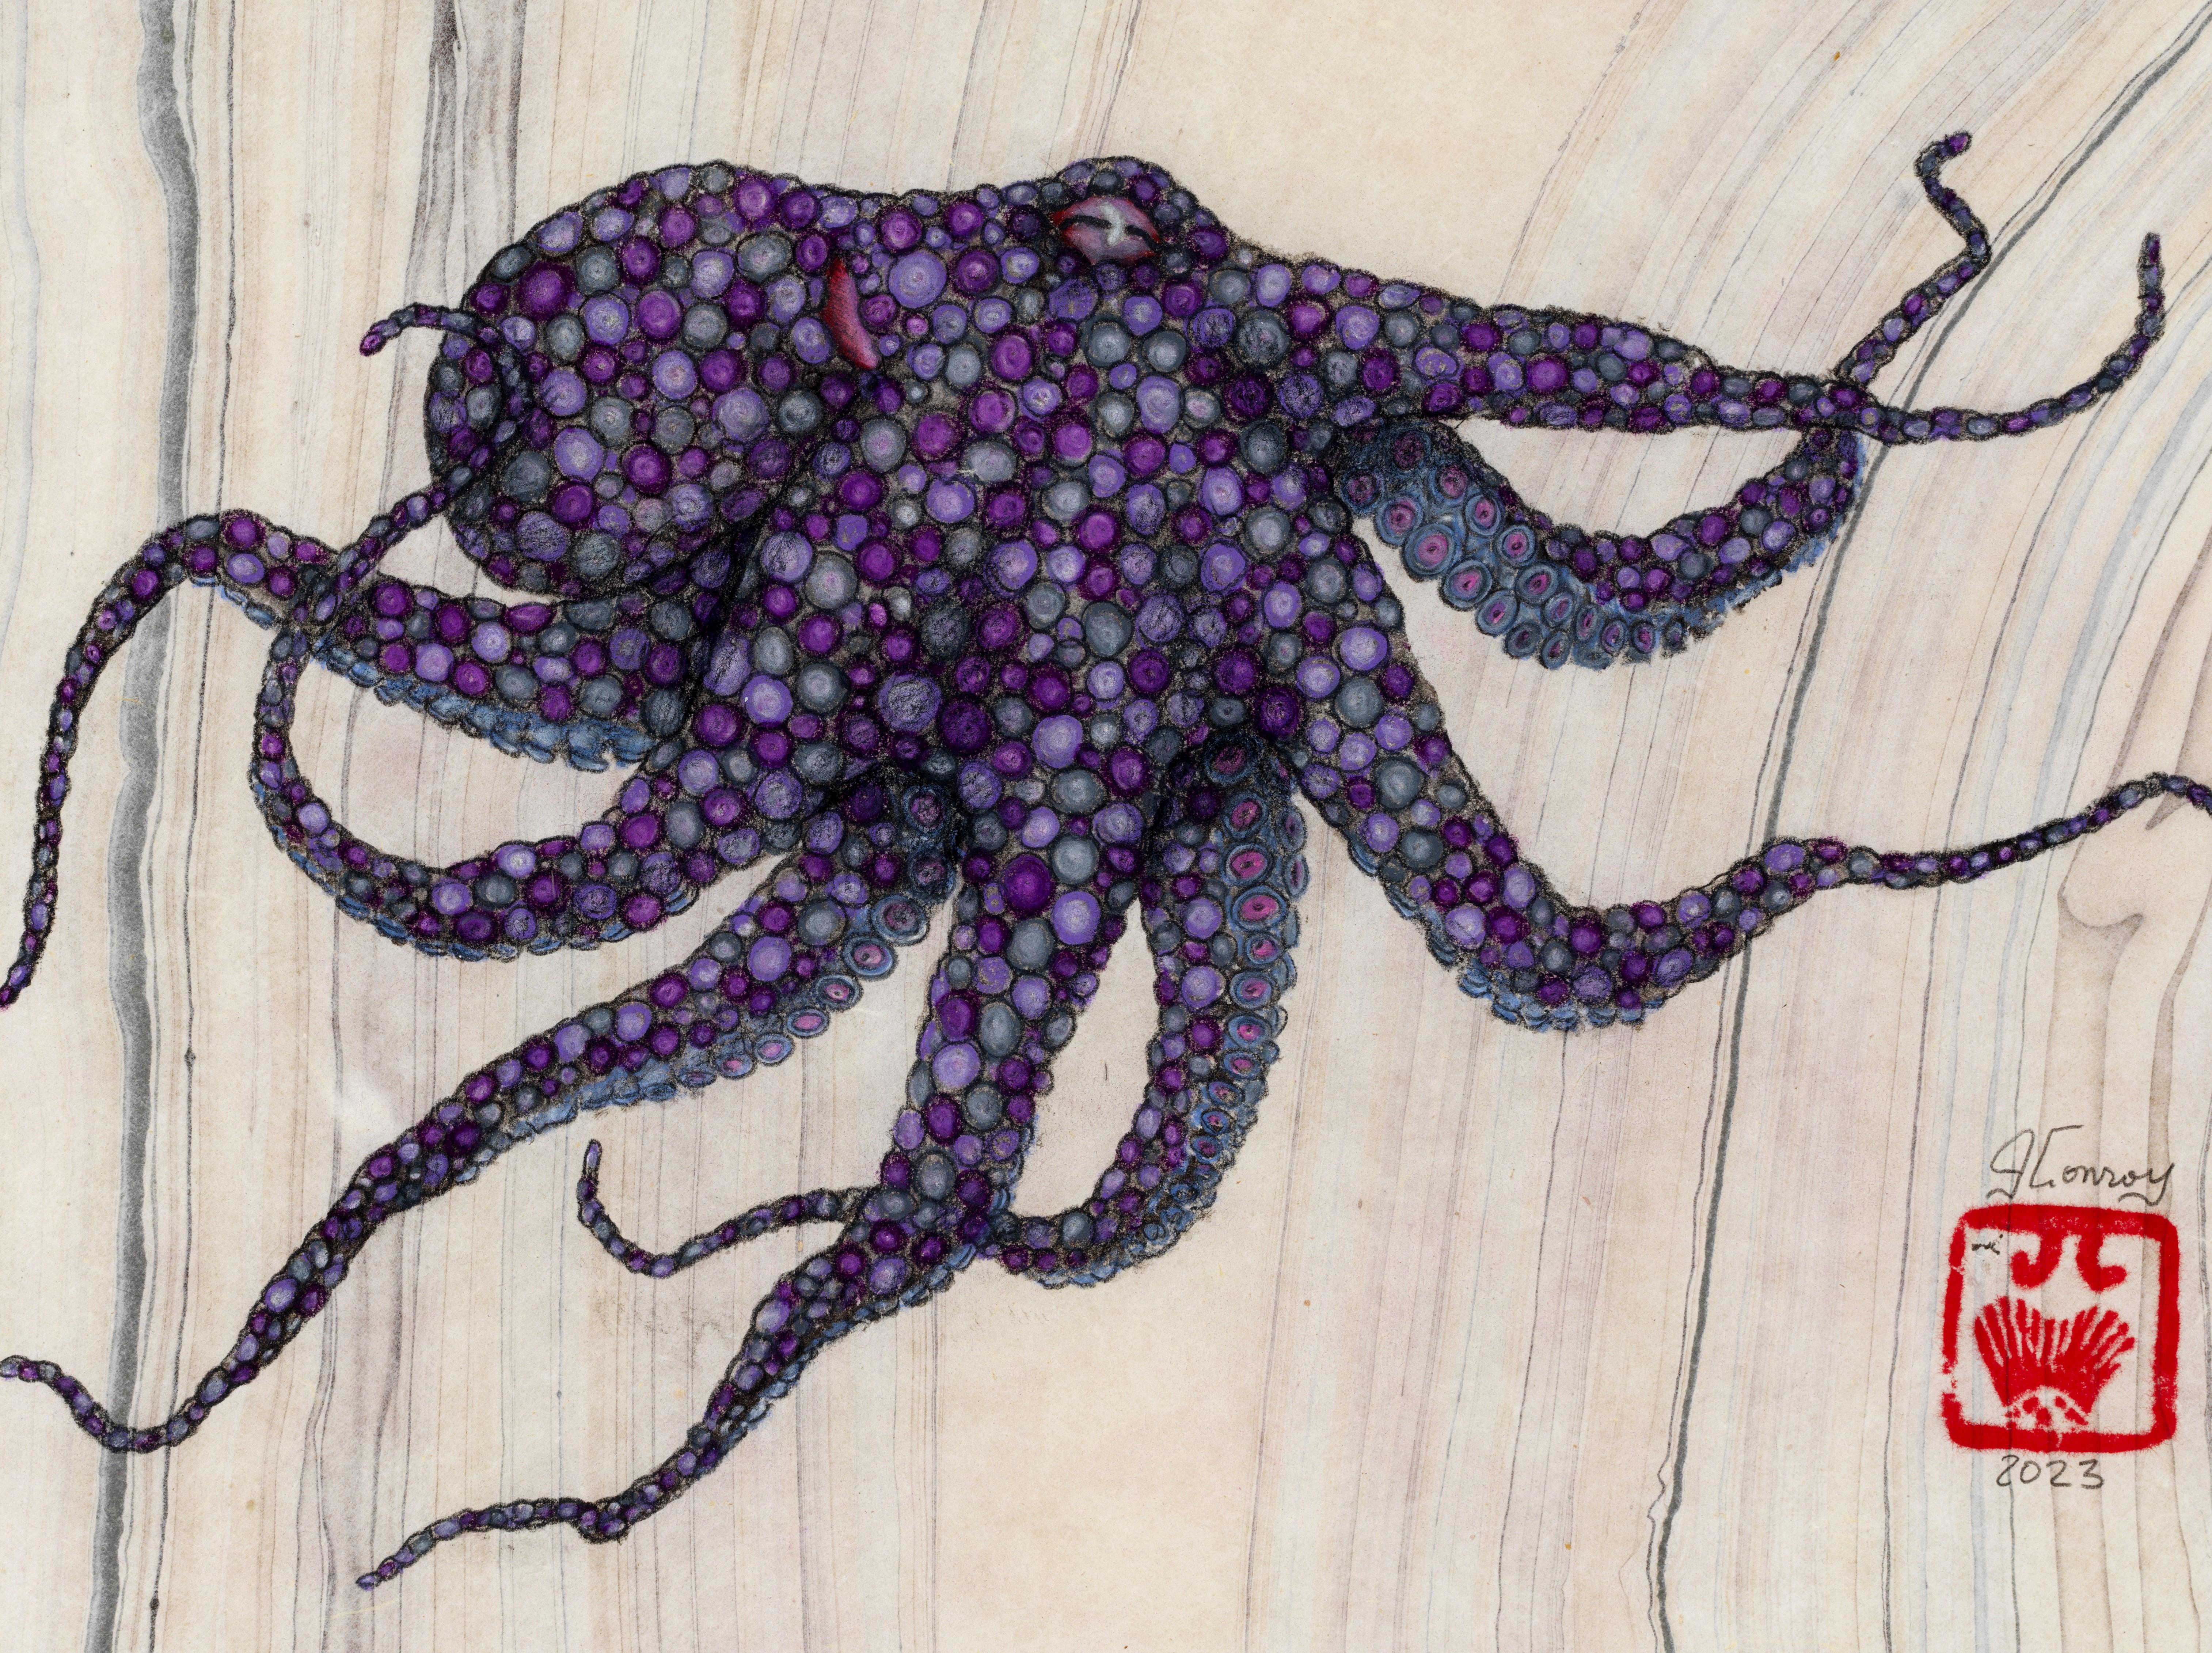 Pinot Noir - Gyotaku Style Sumi Ink Painting of an Octopus on Mulberry Paper - Beige Animal Painting by Jeff Conroy